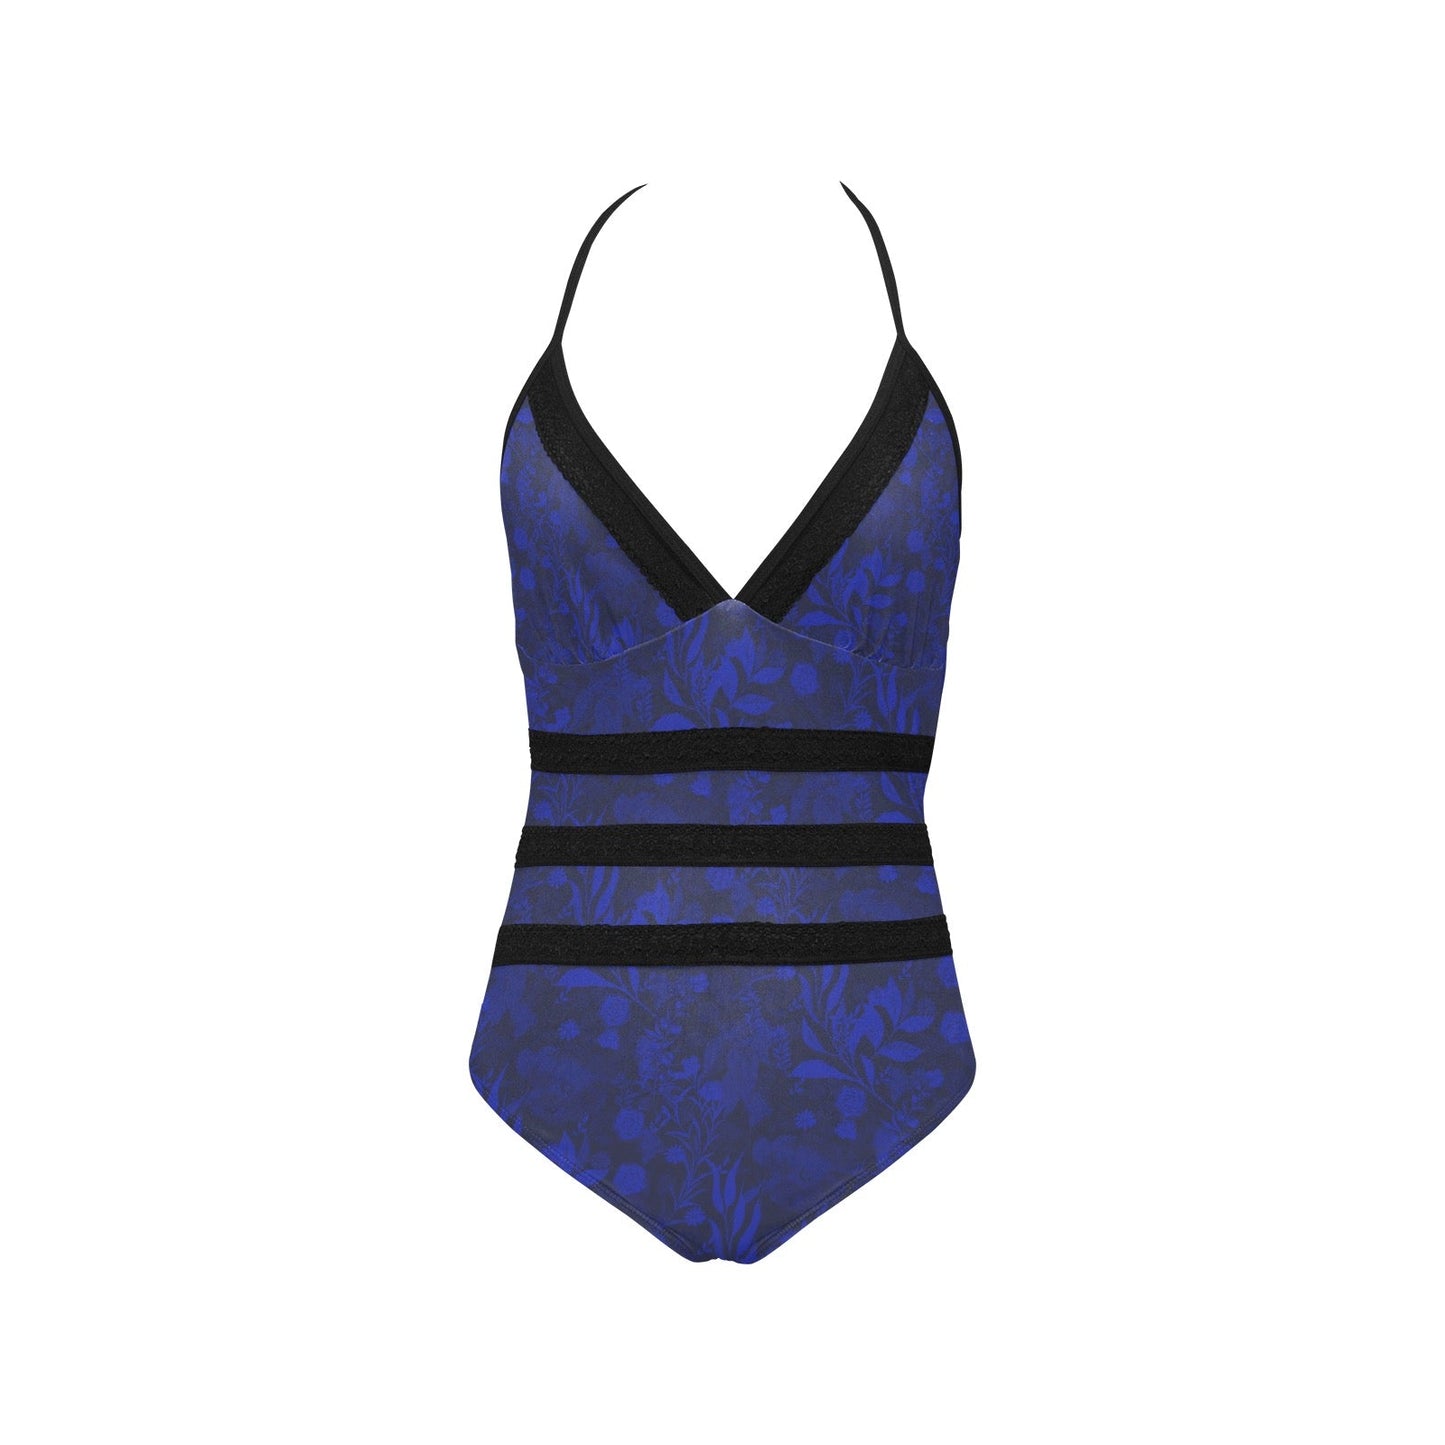 Caracas Collection Blue & Black Lace Band Swimsuit. Design hand-painted by the Designer Maria Alejandra Echenique